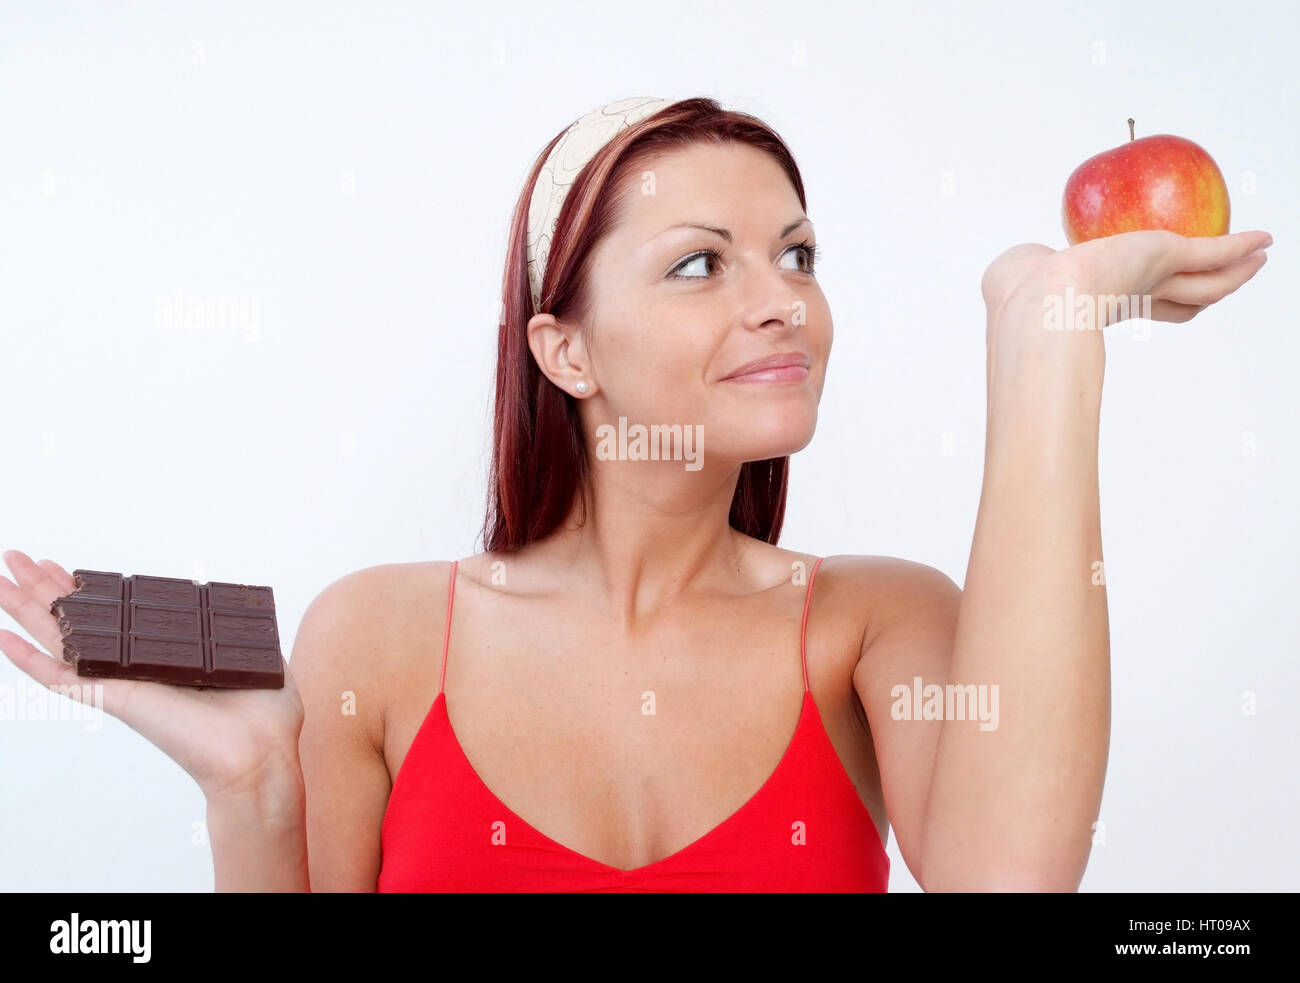 Junge Frau mit Schokolade und Apfel, Suesses oder Vitamine - young woman with chocolate and apple Stock Photo